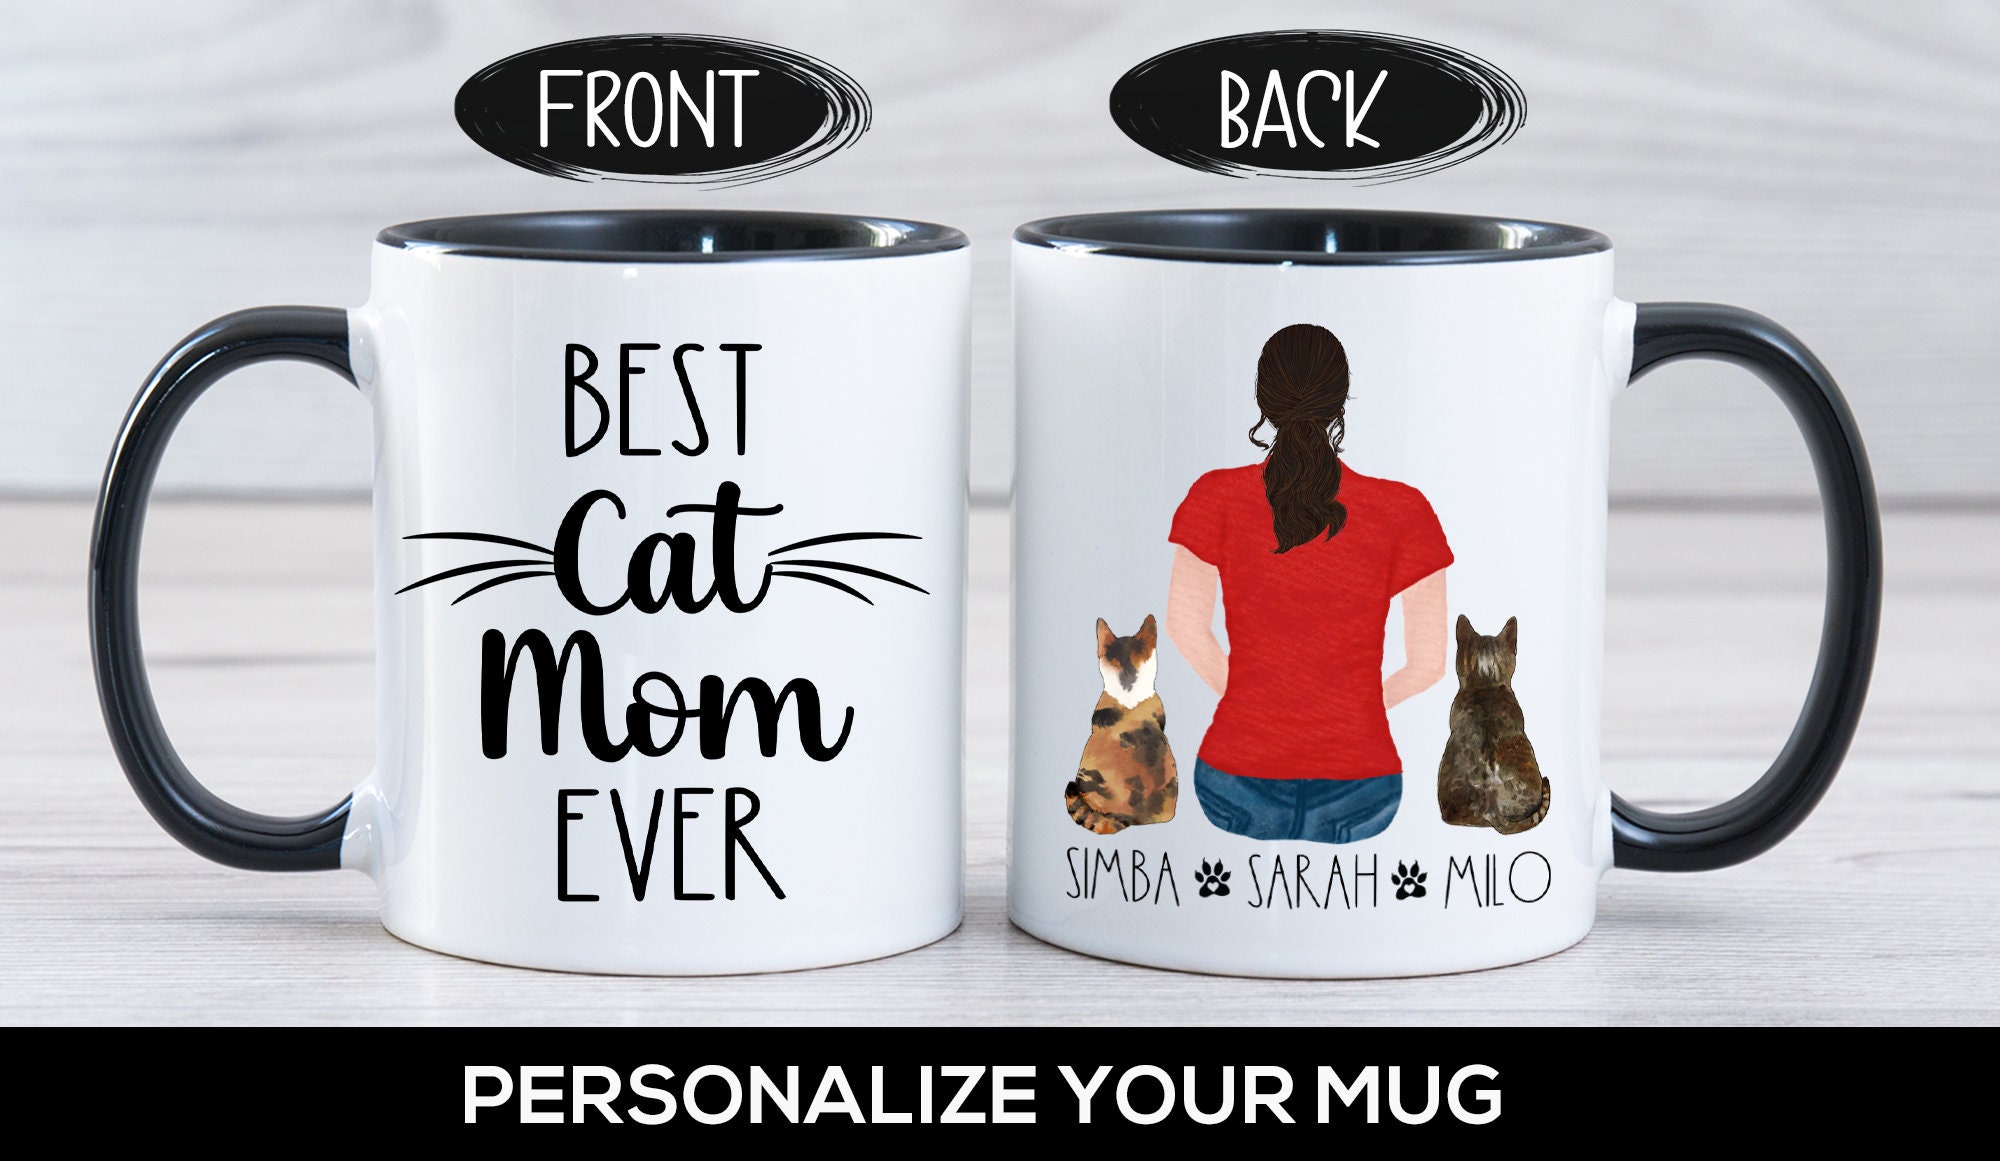 cat mom gifts personalize personal cat lover Gift Idea unique cat mug gift cat lady Best Cat Mom Ever Personalized MUG v3P